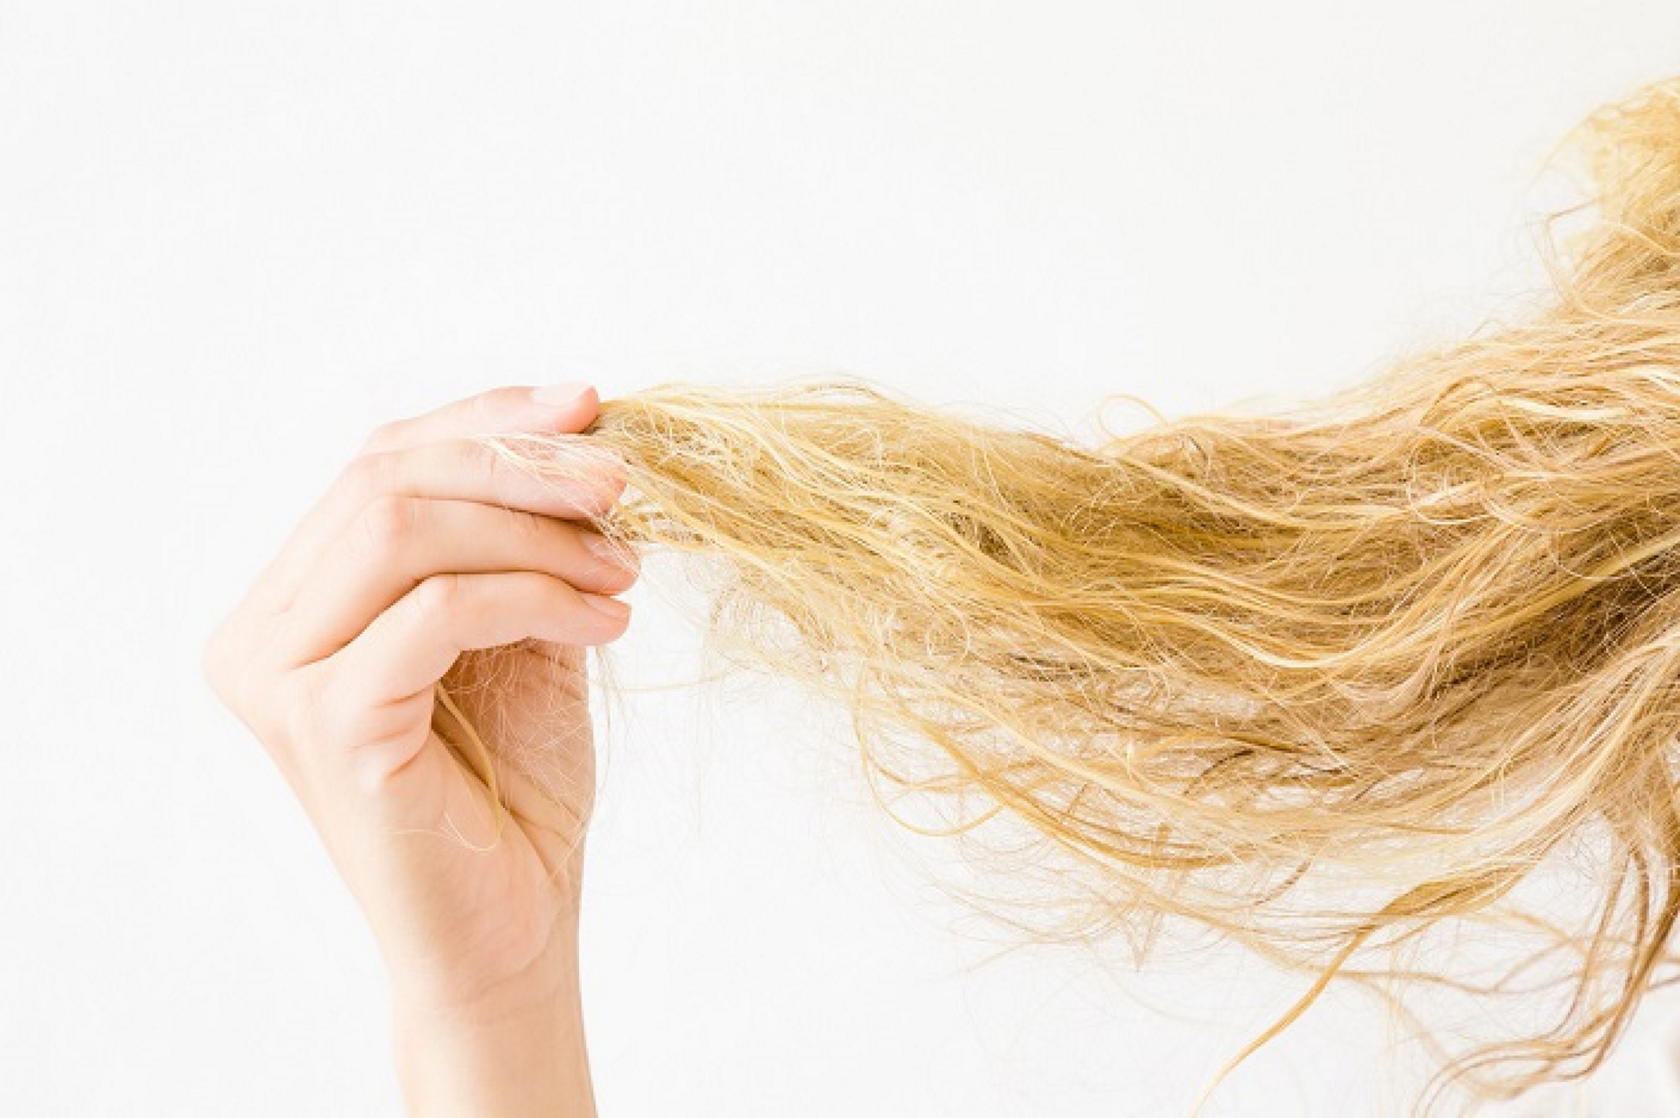 Why Is My Hair So Frizzy? 6 Causes of Frizzy Hair | John Frieda